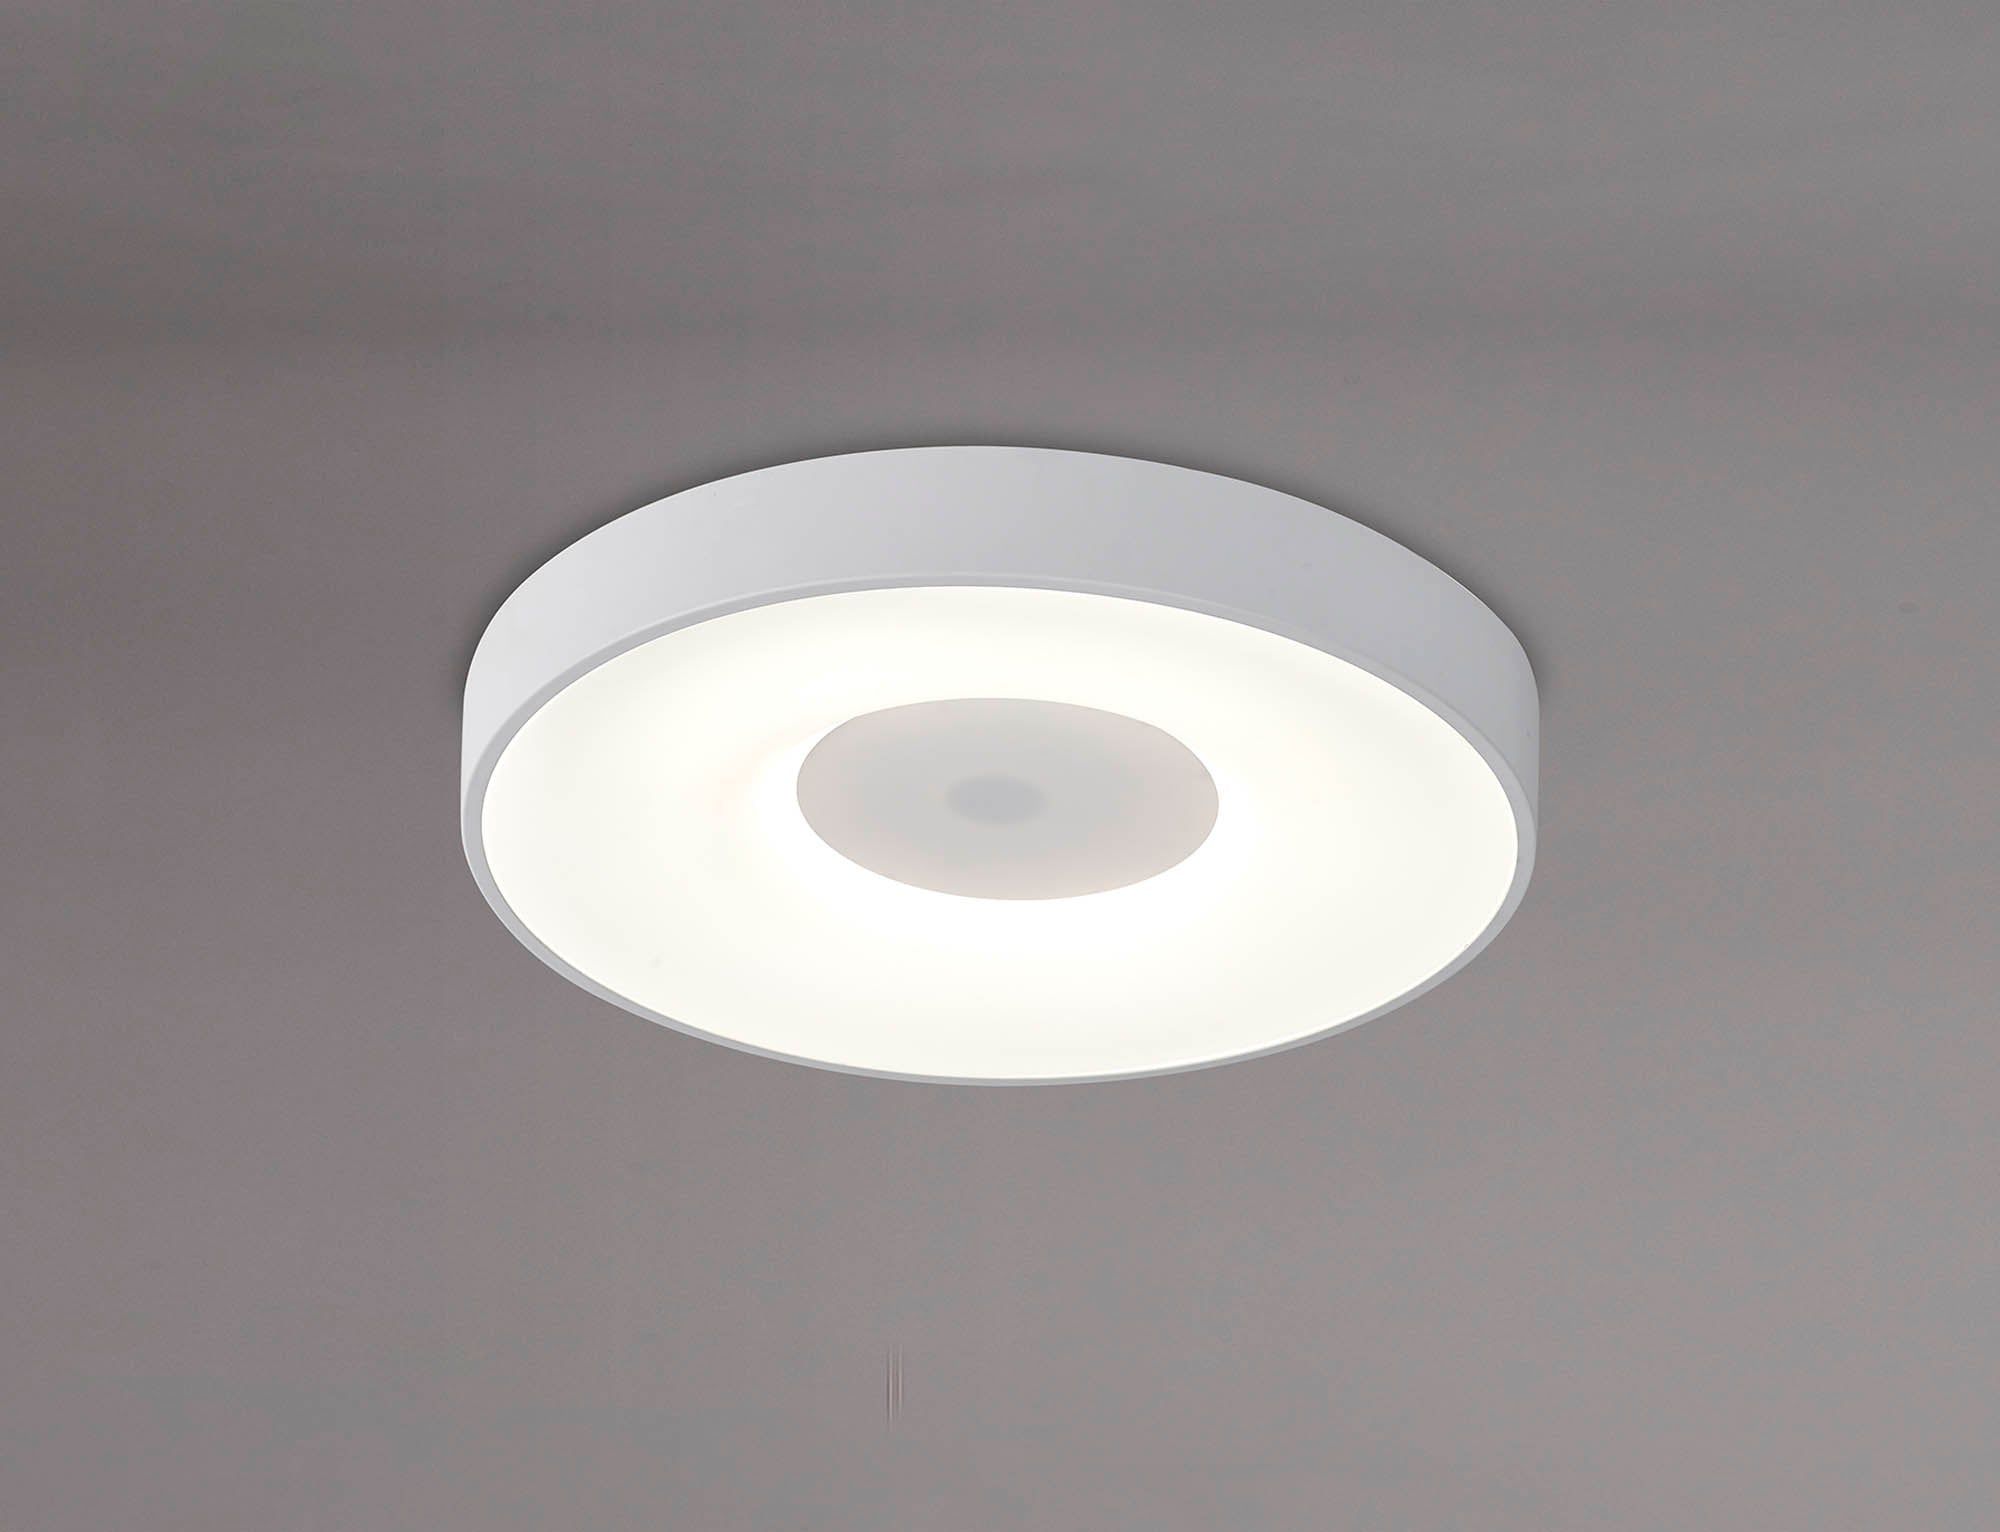 Coin Round Ceiling 80W LED With Remote Control 2700K-5000K, 3900lm, White, 3yrs Warranty